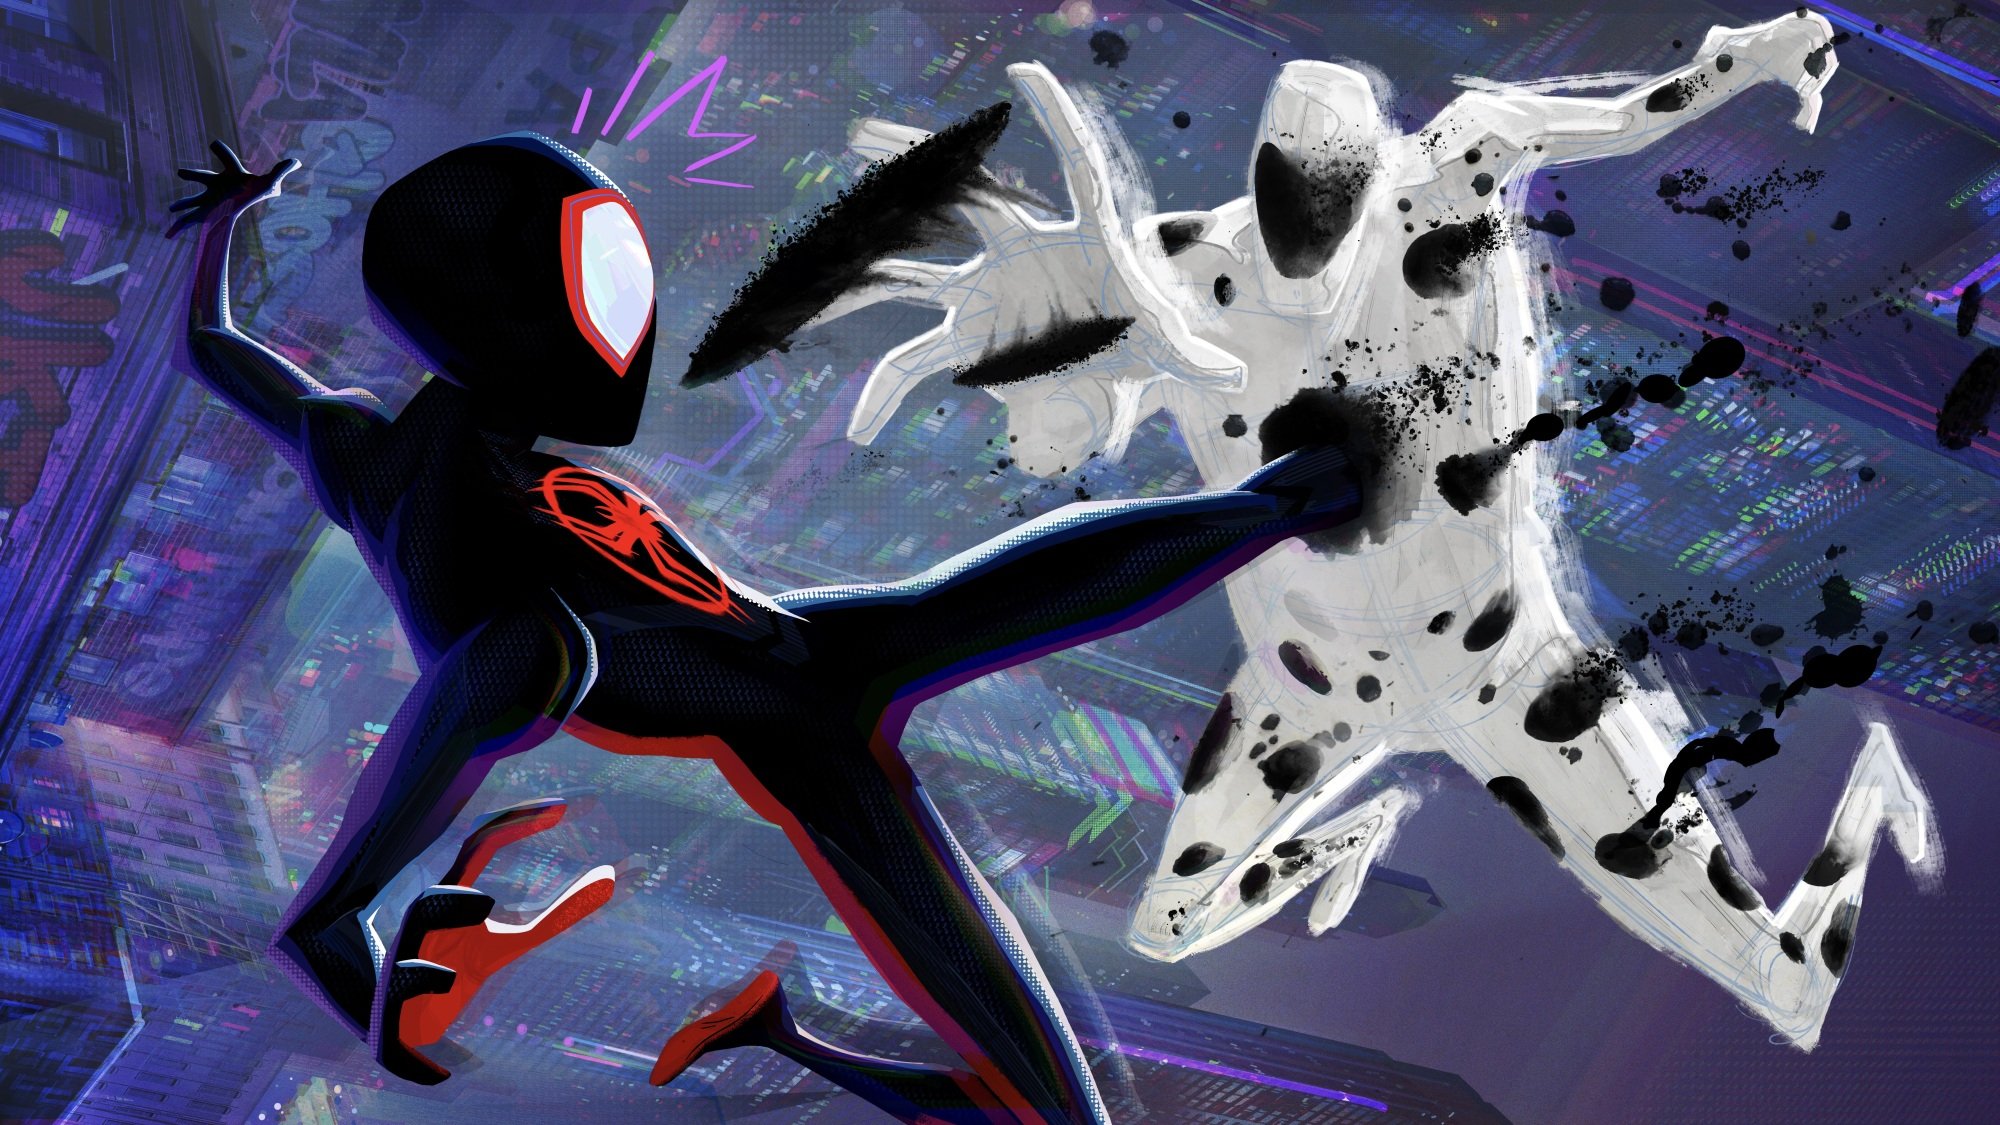 Miles Morales in his red and black Spider-Man suit kicks out at the Spot, a man with all-white skin covered in black holes.